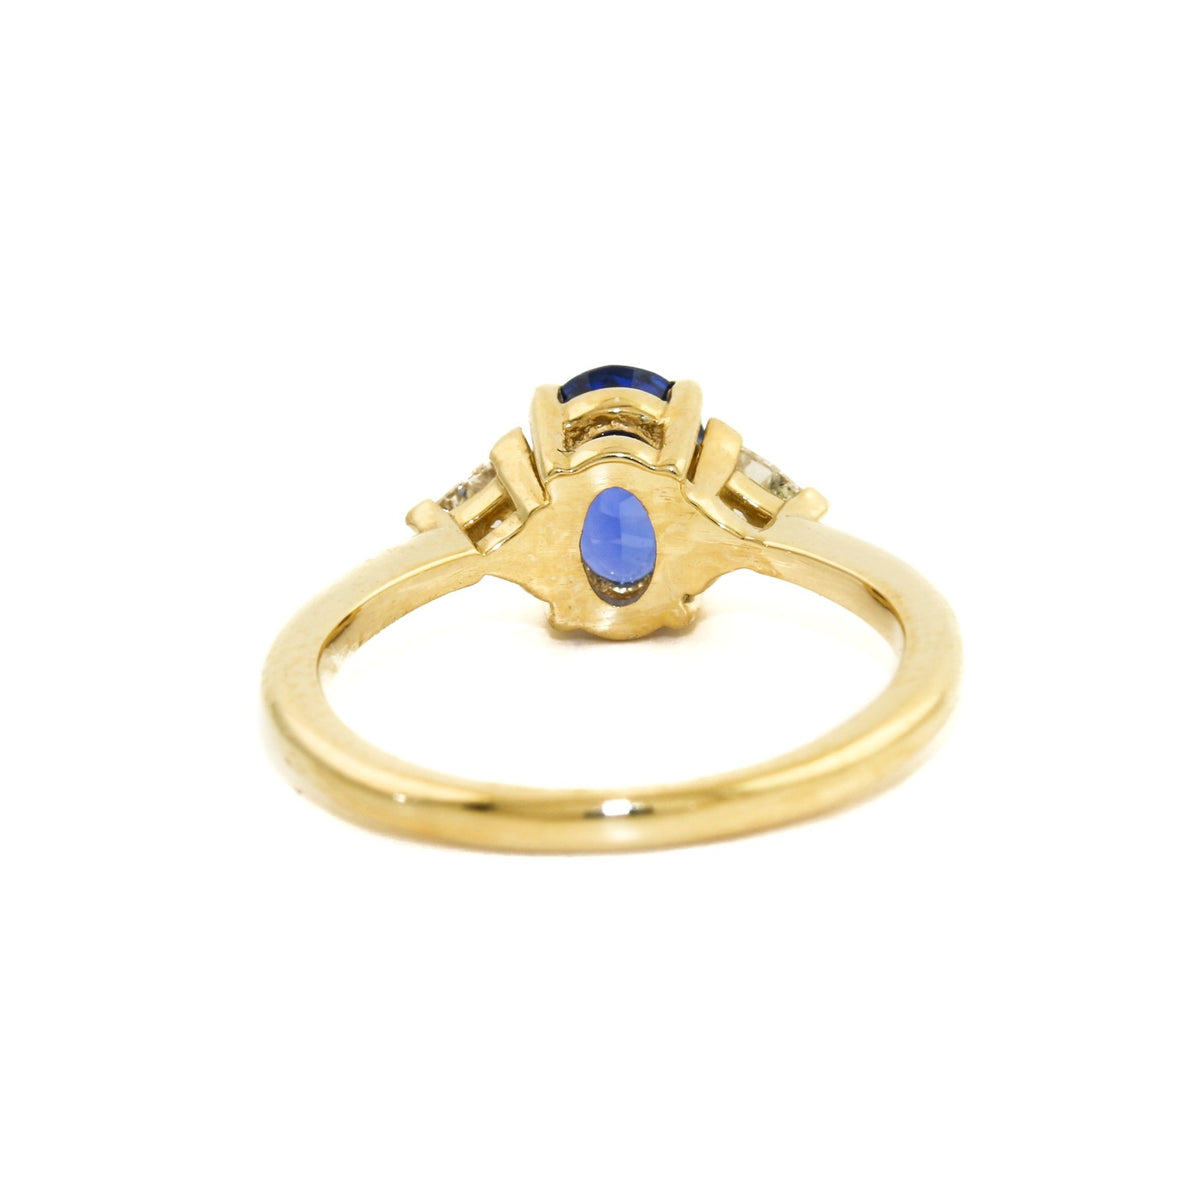 Introducing our breathtaking royal blue Montana sapphire ring with triangle cut diamonds set in 18k gold, a true masterpiece of beauty, luxury and elegance.